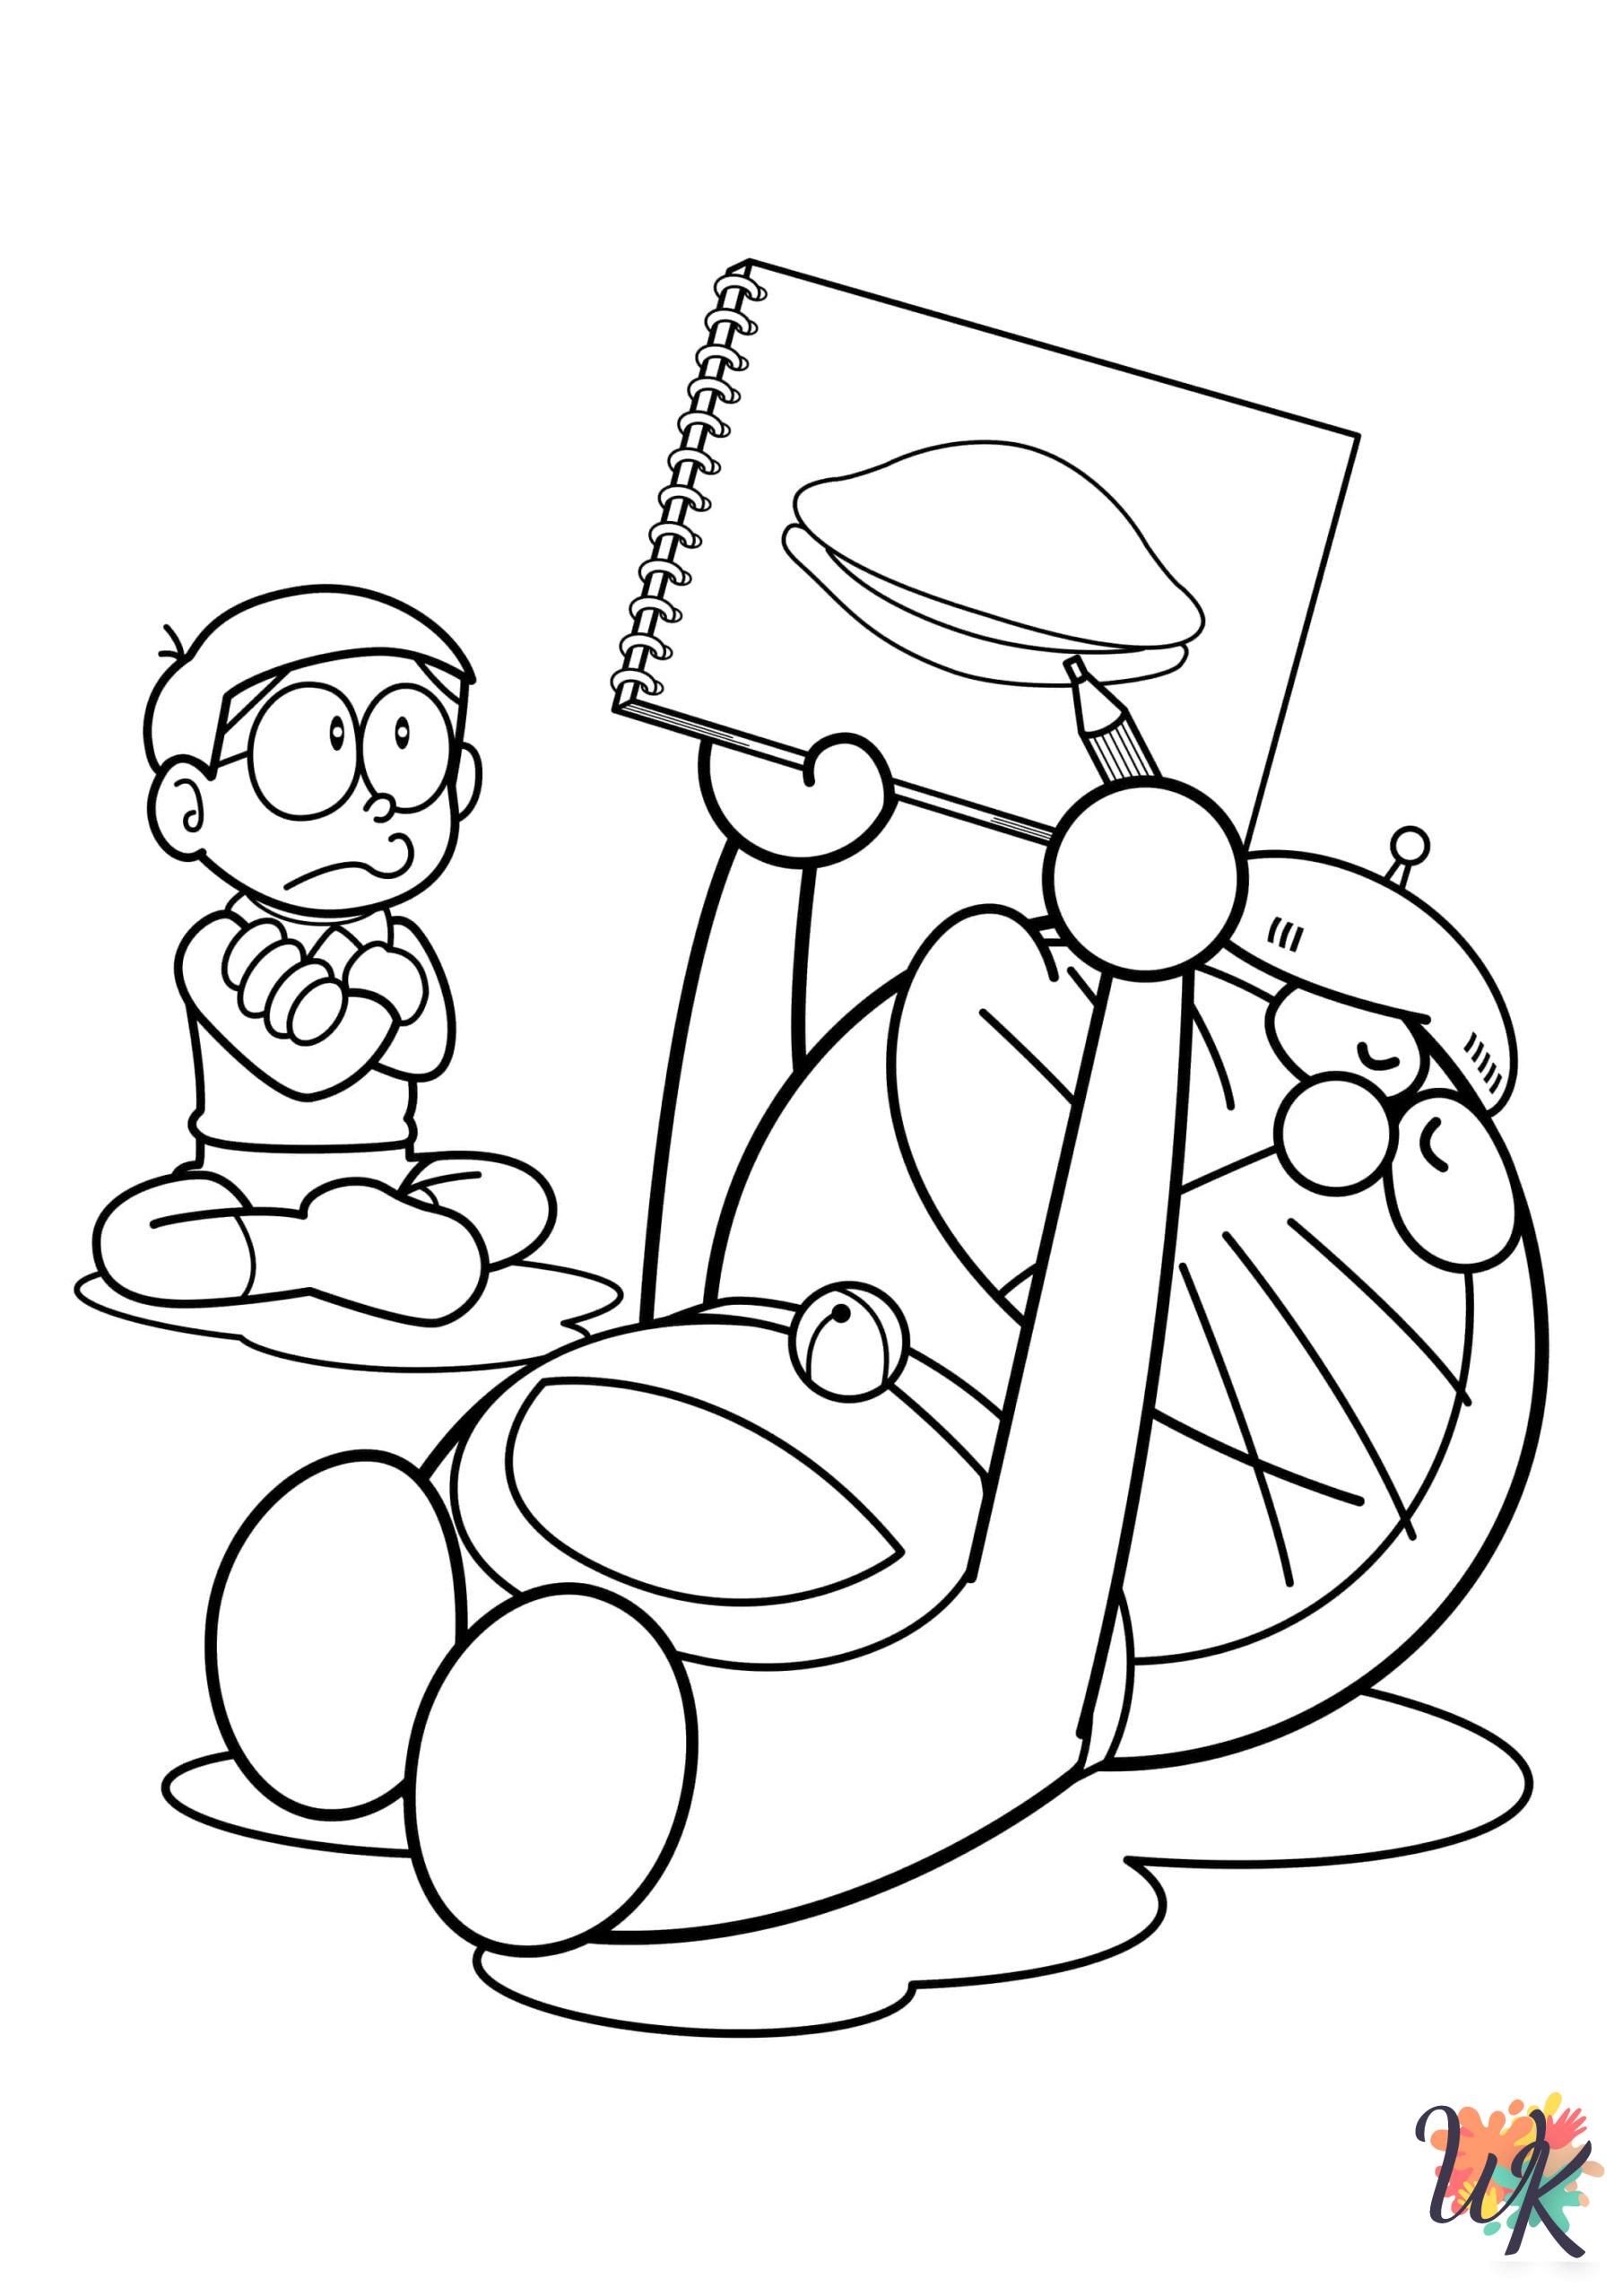 Doraemon coloring pages for adults easy